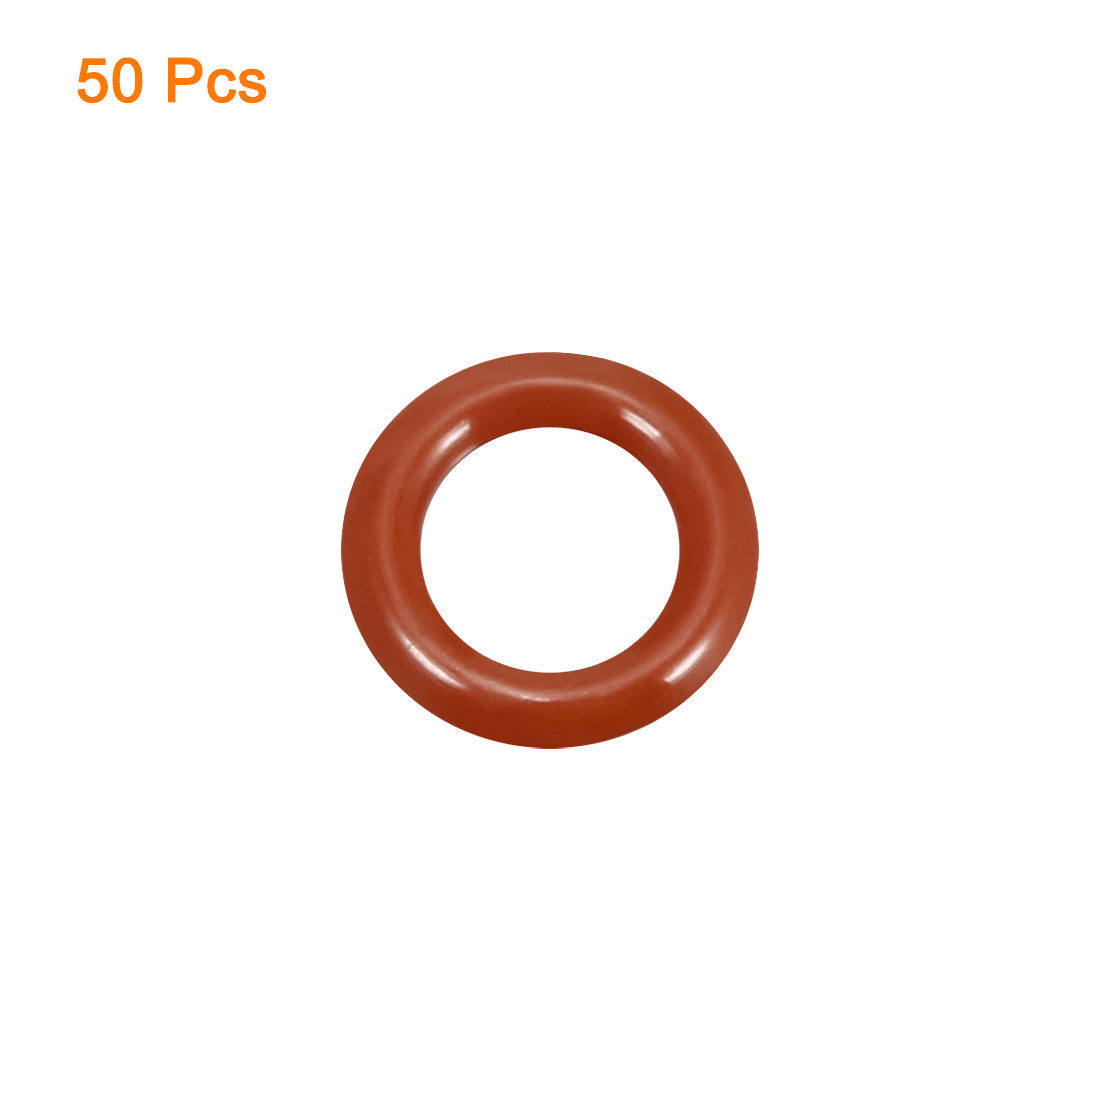 uxcell Uxcell Silicone O-Ring 12mmx7.2mmx2.4mm VMQ Seal Rings Sealing Gasket Red 50PCS